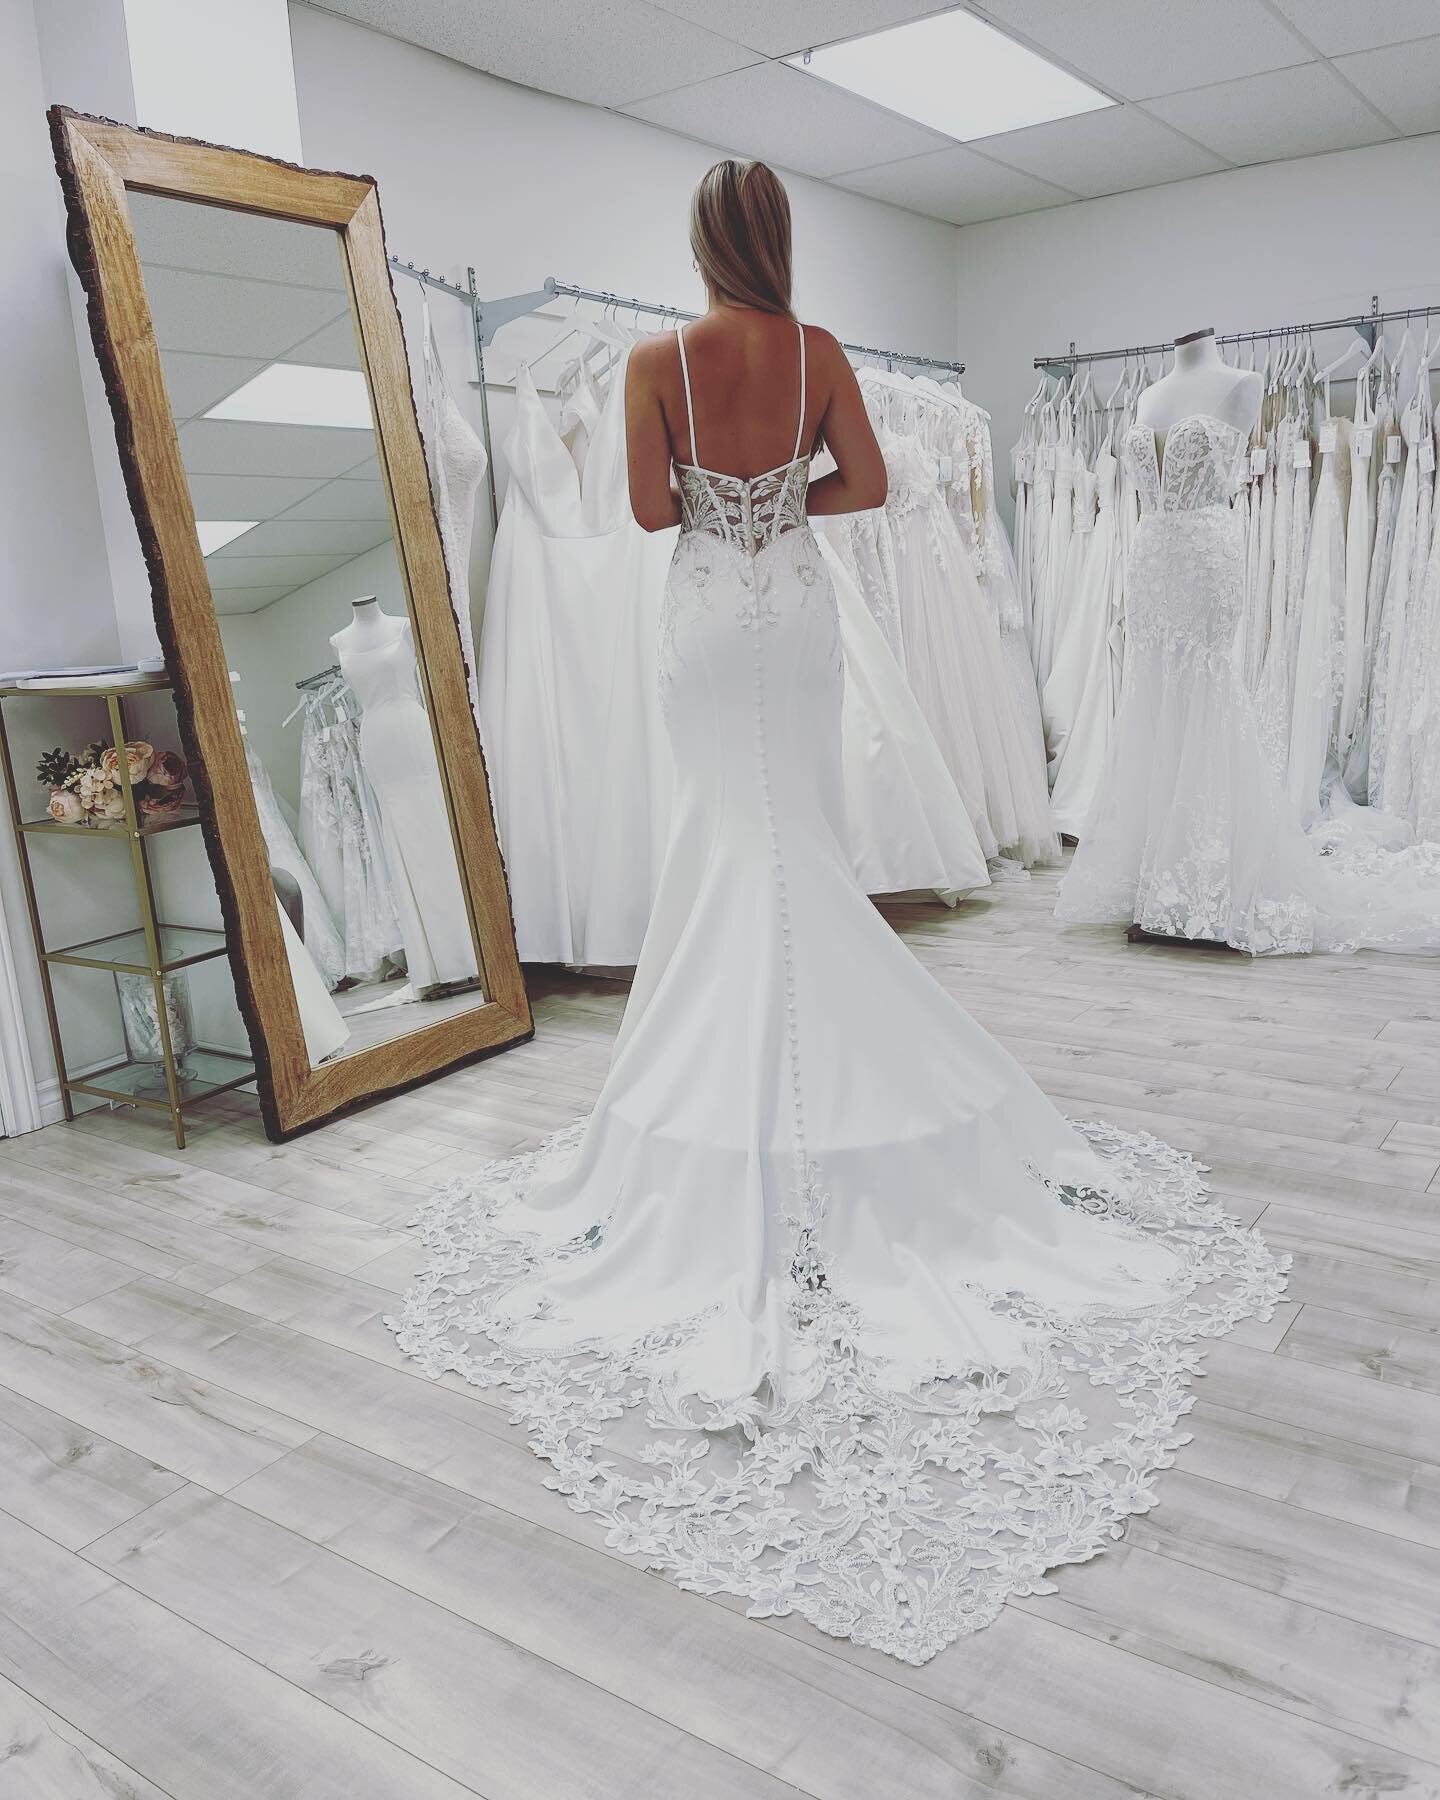 💥End of Summer Bridal Sale 2022💥

Looking for the perfect dress at a great price? We just added over 30 new gowns to this event!

For 2 days only, we will be having over 80 gowns marked down from 40-80% off!
W H A T 🤩  all gowns marked under $1500